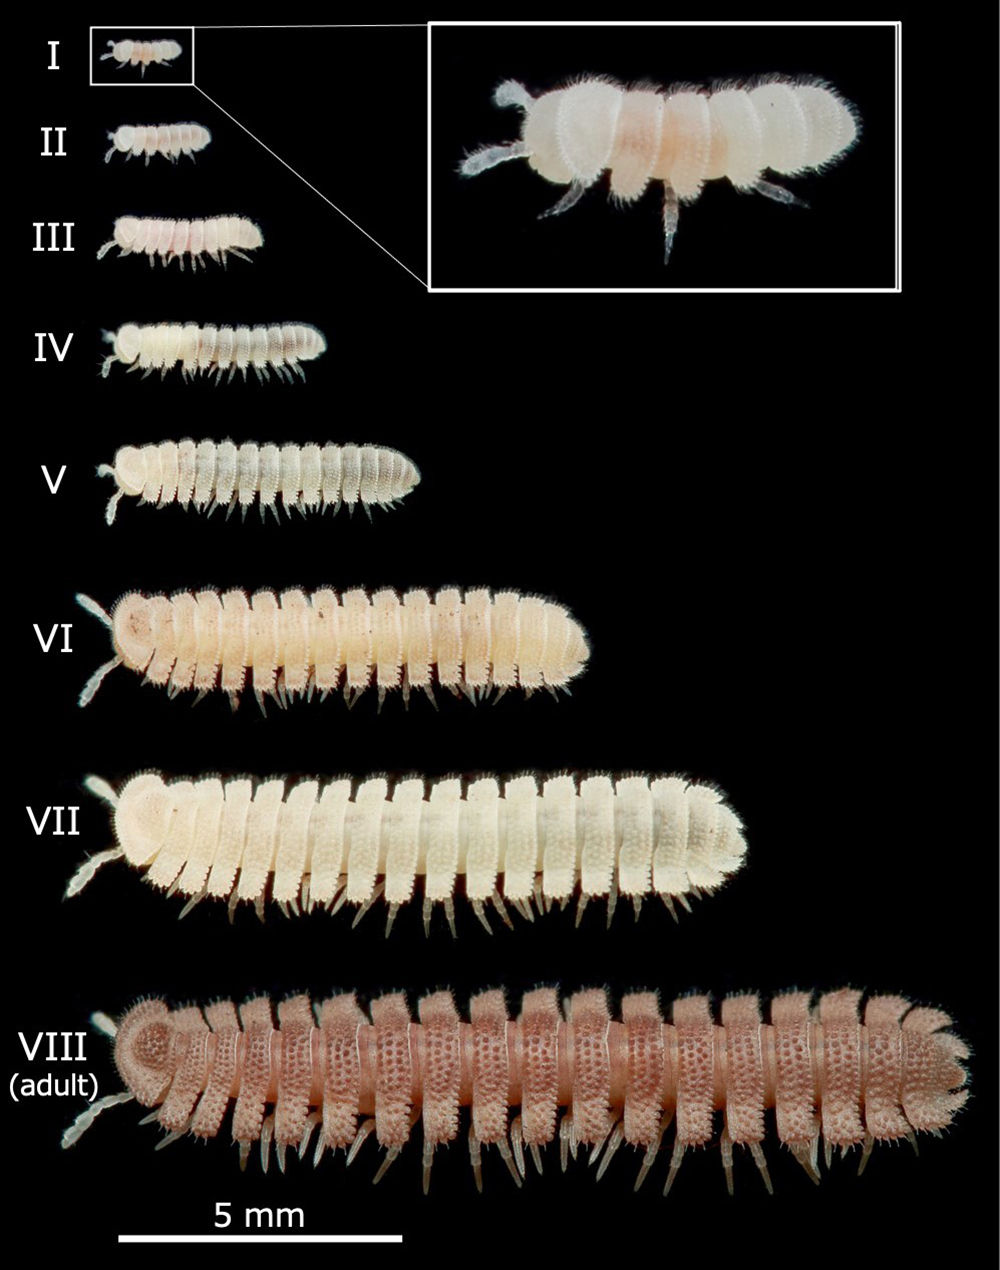 A photo of millipedes compared during the eight life cycle stages, from small baby to large adult. 